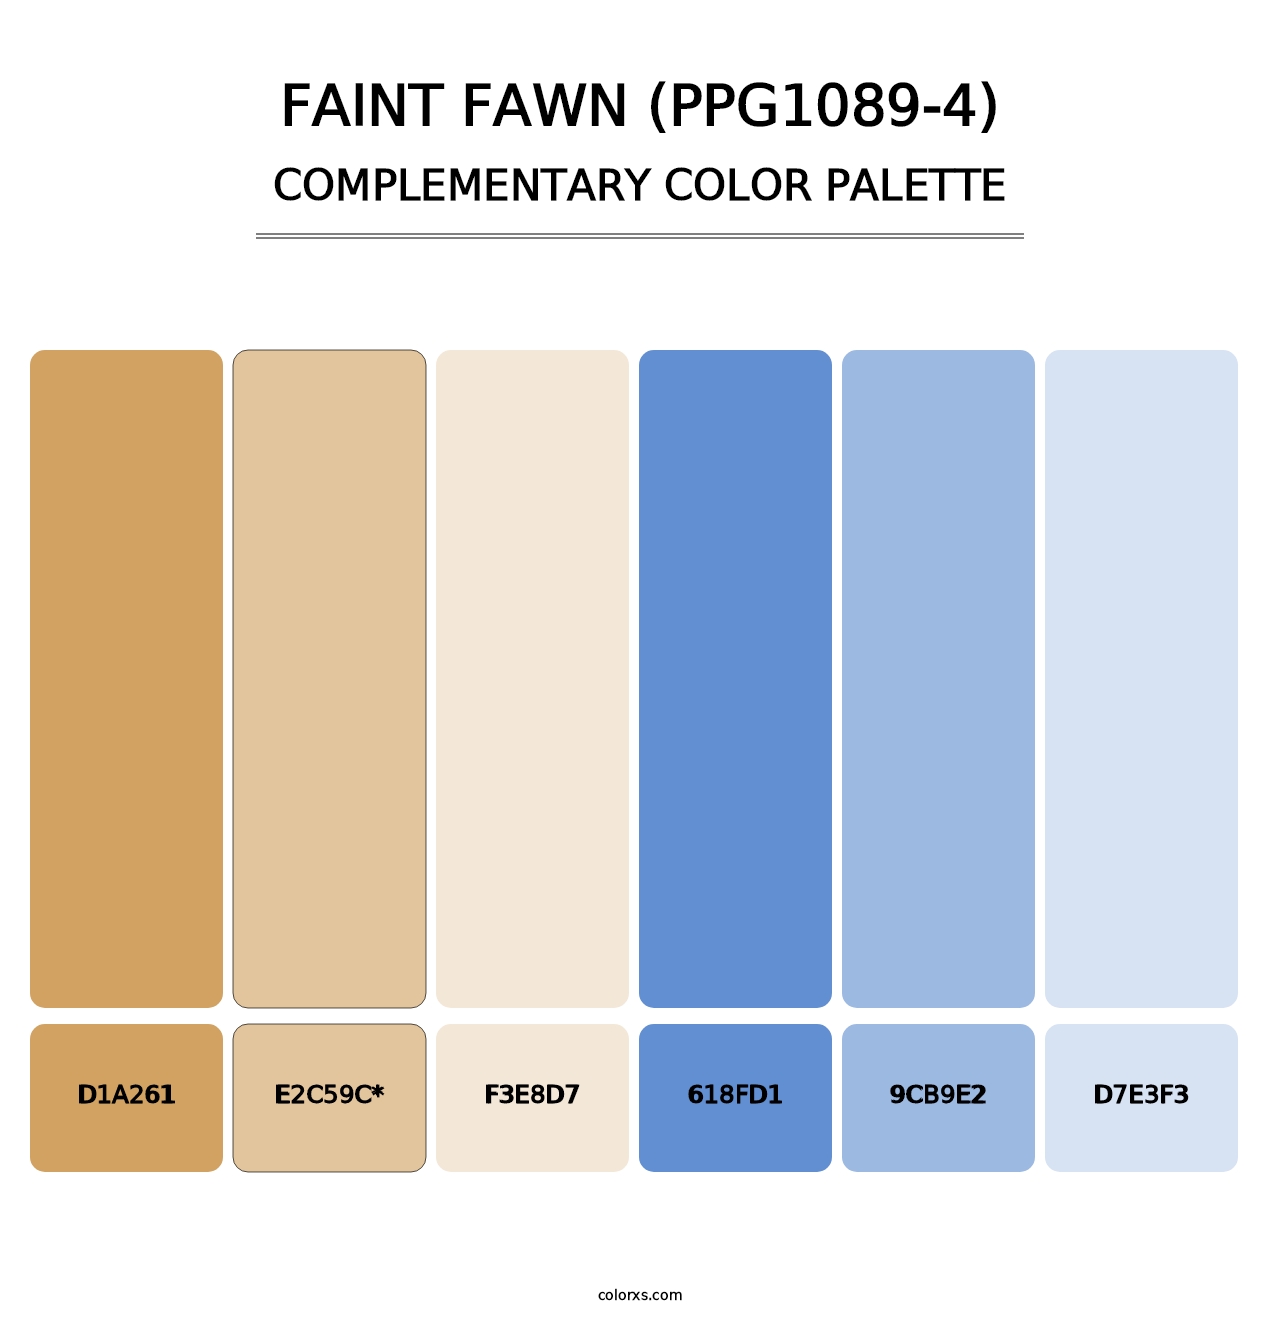 Faint Fawn (PPG1089-4) - Complementary Color Palette